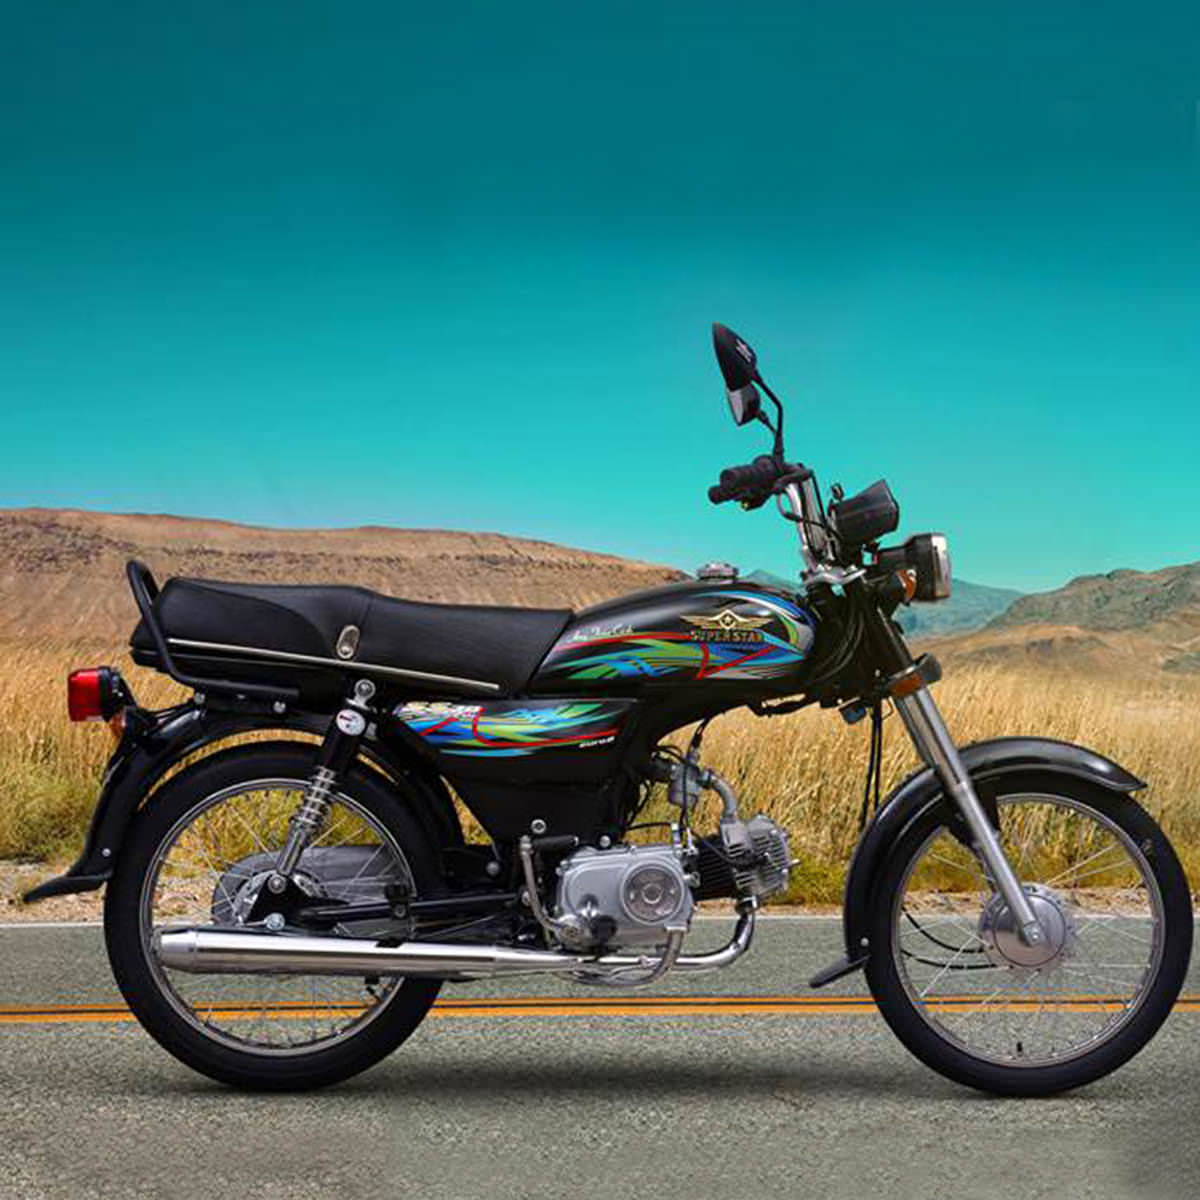 Super Star Ss 70 2020 Model Bike Price In Pakistan Latest Features